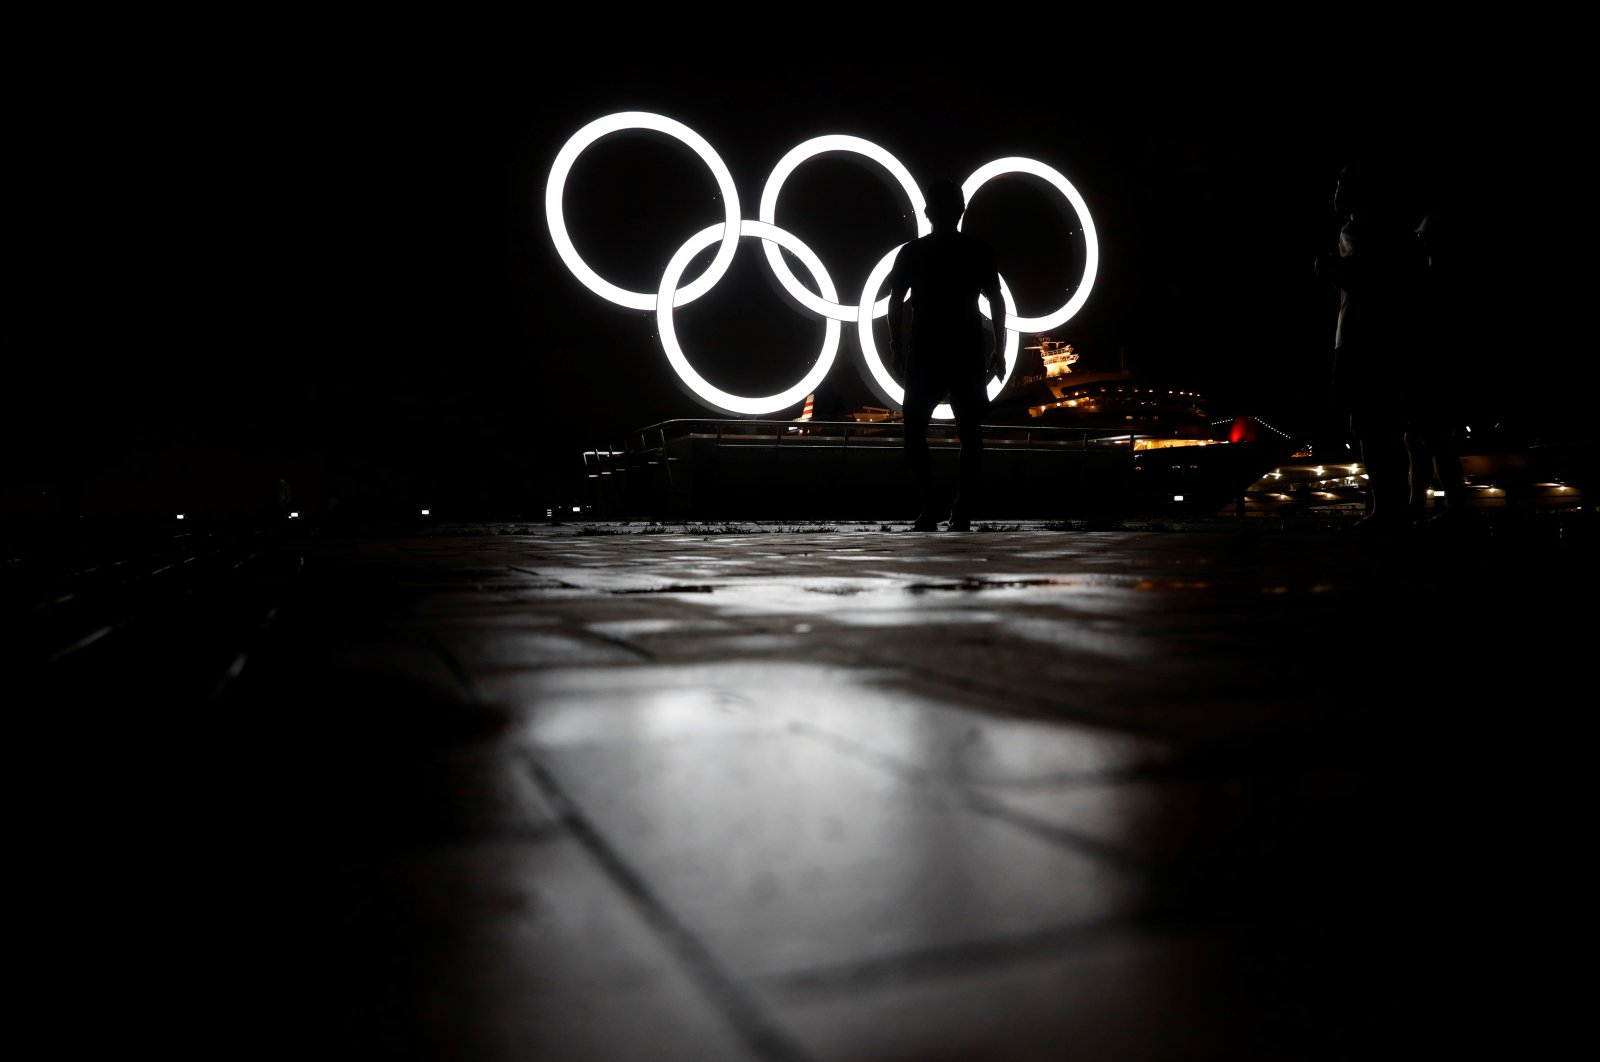 Visitors look at newly installed Olympic rings for celebrating the 2020 Tokyo Olympic Games in Yokohama, Japan, June 30, 2021. (Reuters Photo)